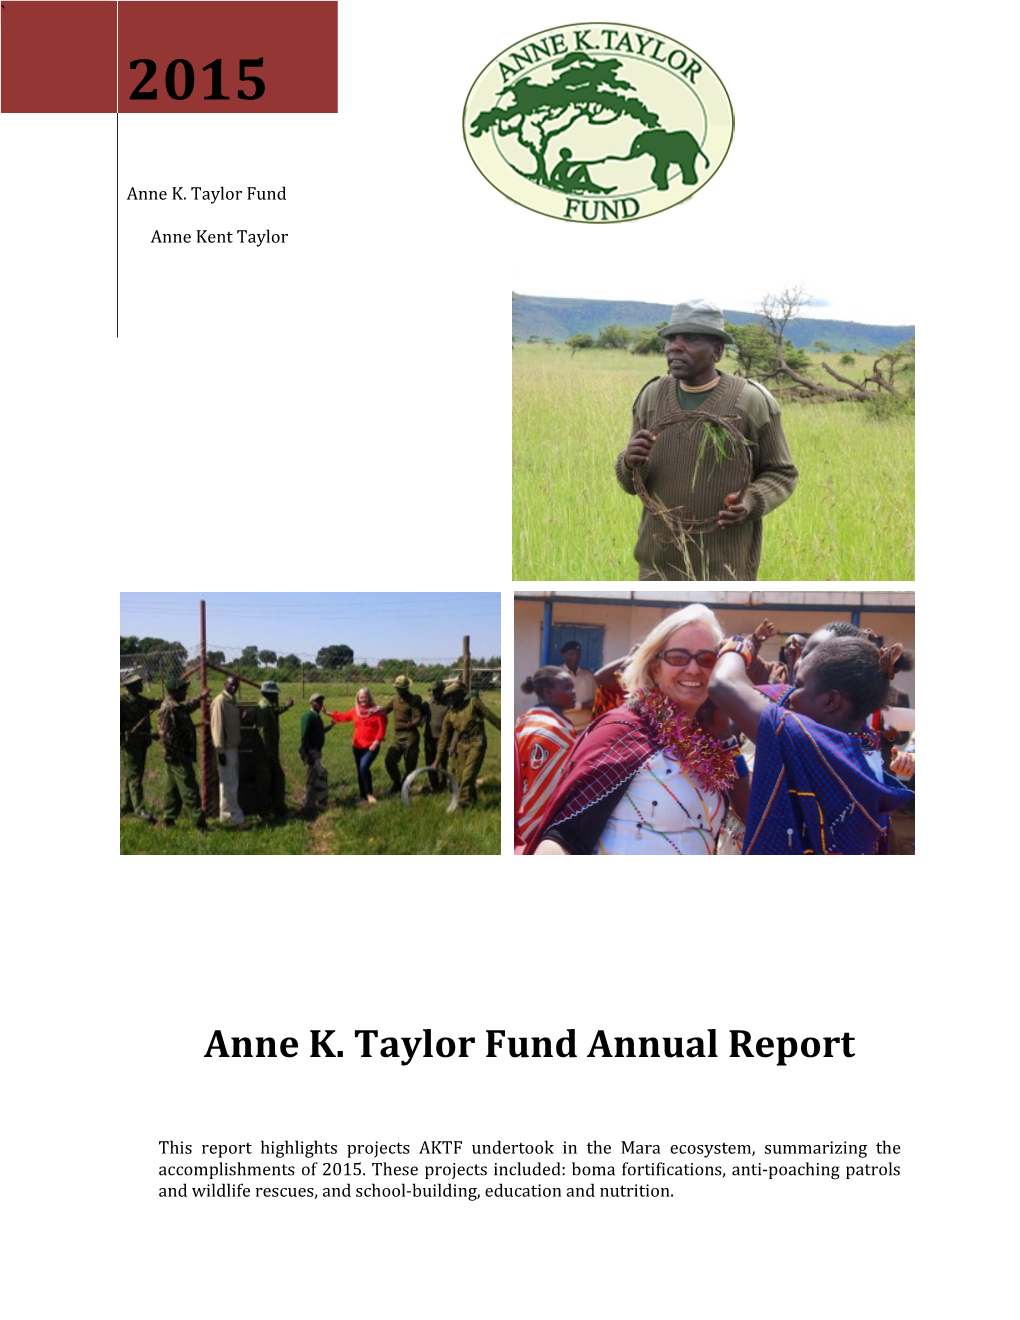 Anne K. Taylor Fund Annual Report